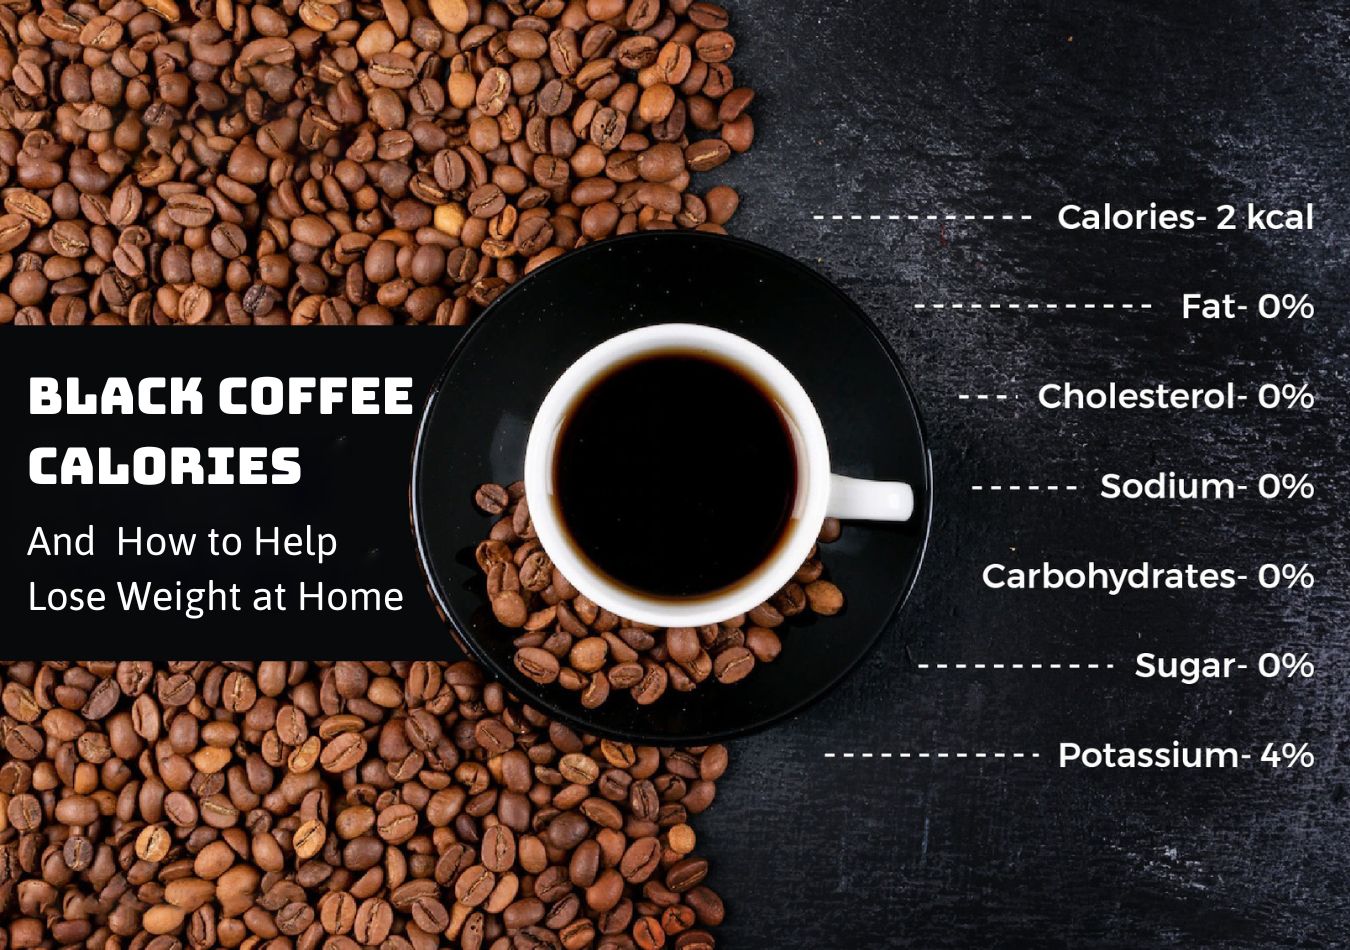 Black Coffee Calories and How to Help Lose Weight at Home